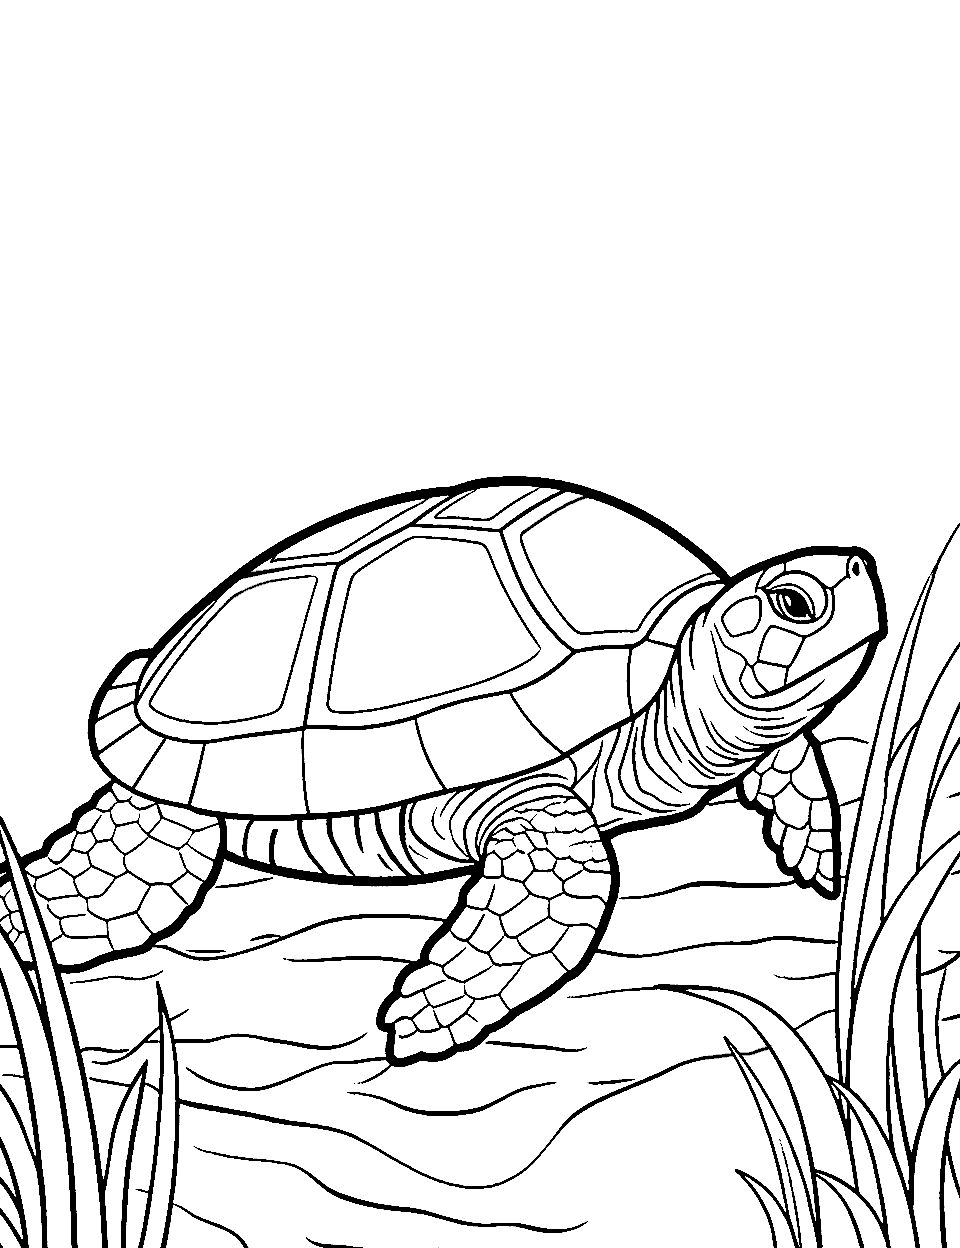 Box Turtle in Grass Coloring Page - A box turtle moving slowly through tall grass.